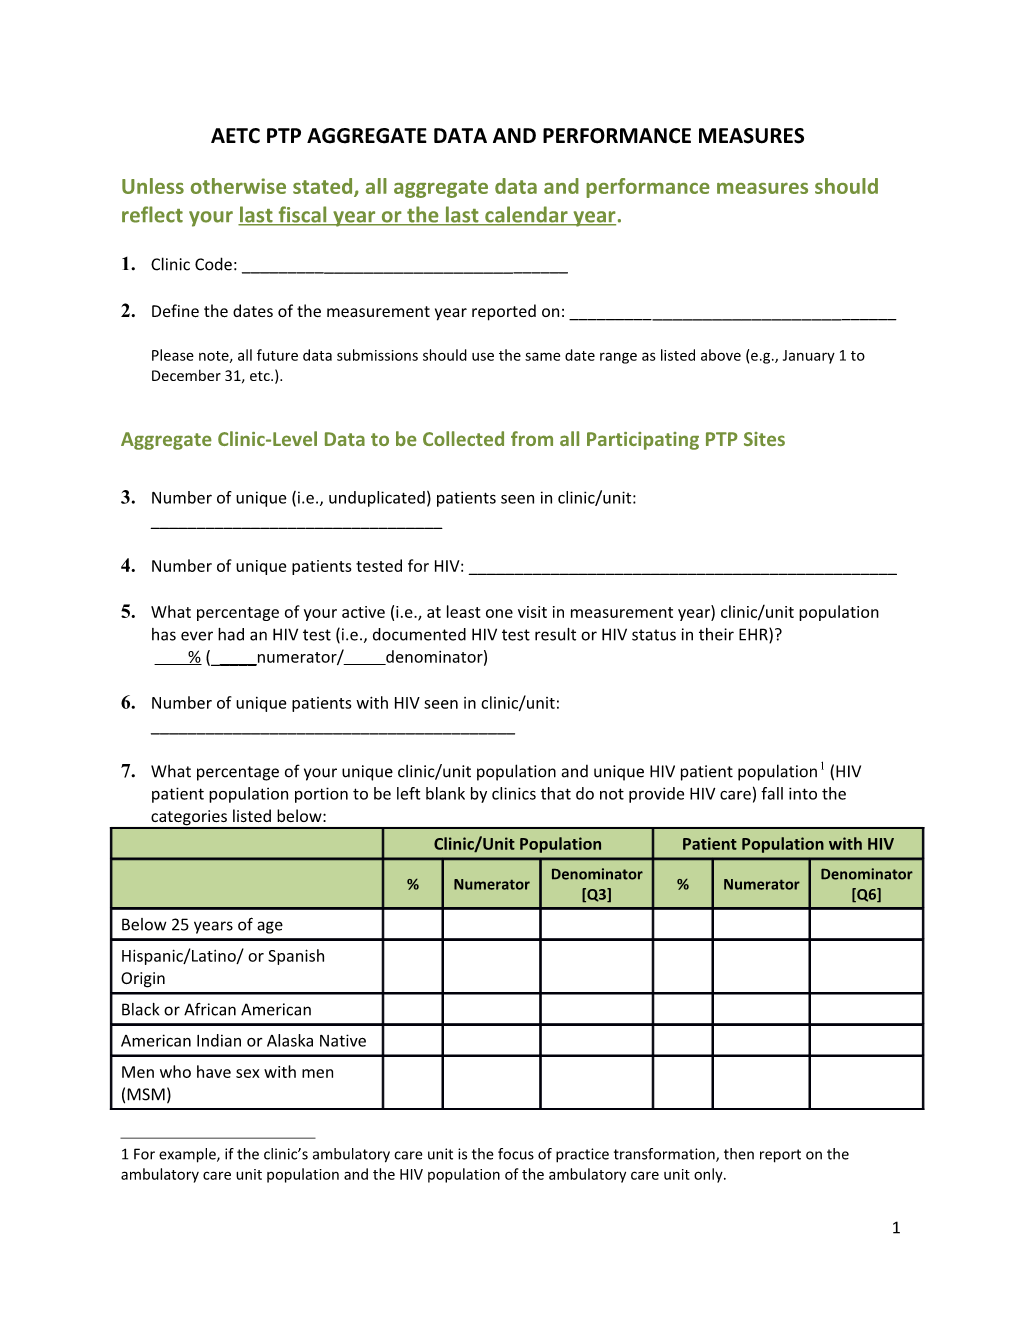 Aetc Ptp Aggregate Data and Performance Measures